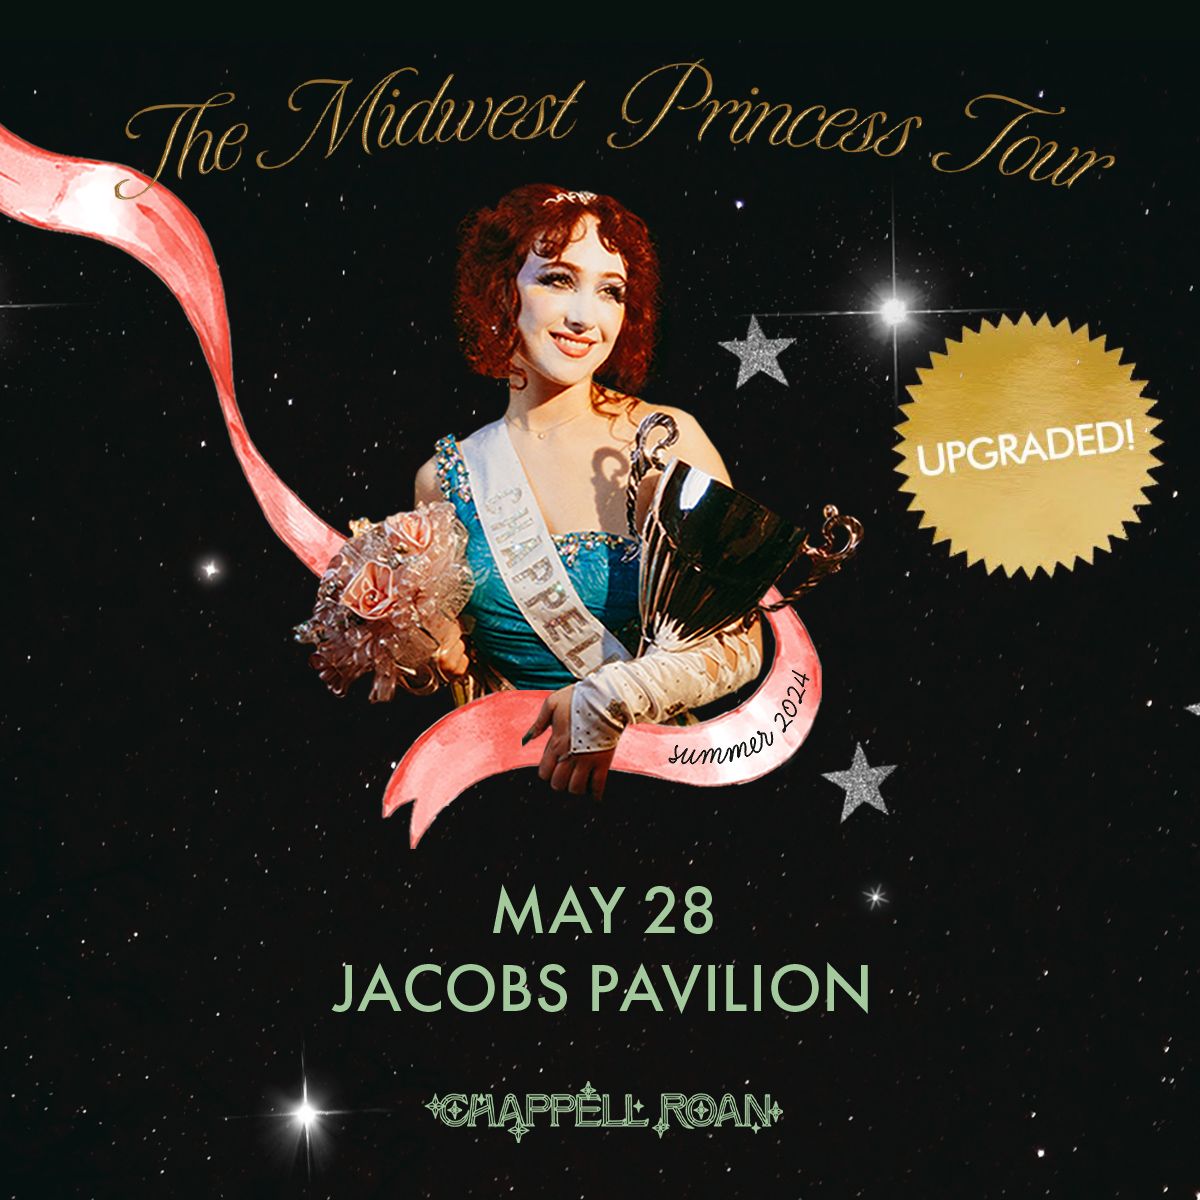 🎠 NEW SHOW 👑 @ChappellRoan | 🗓 May 28 🎫 on sale now: buff.ly/4bb1RKe *This show has been moved from @AgoraCle due to popular demand!*